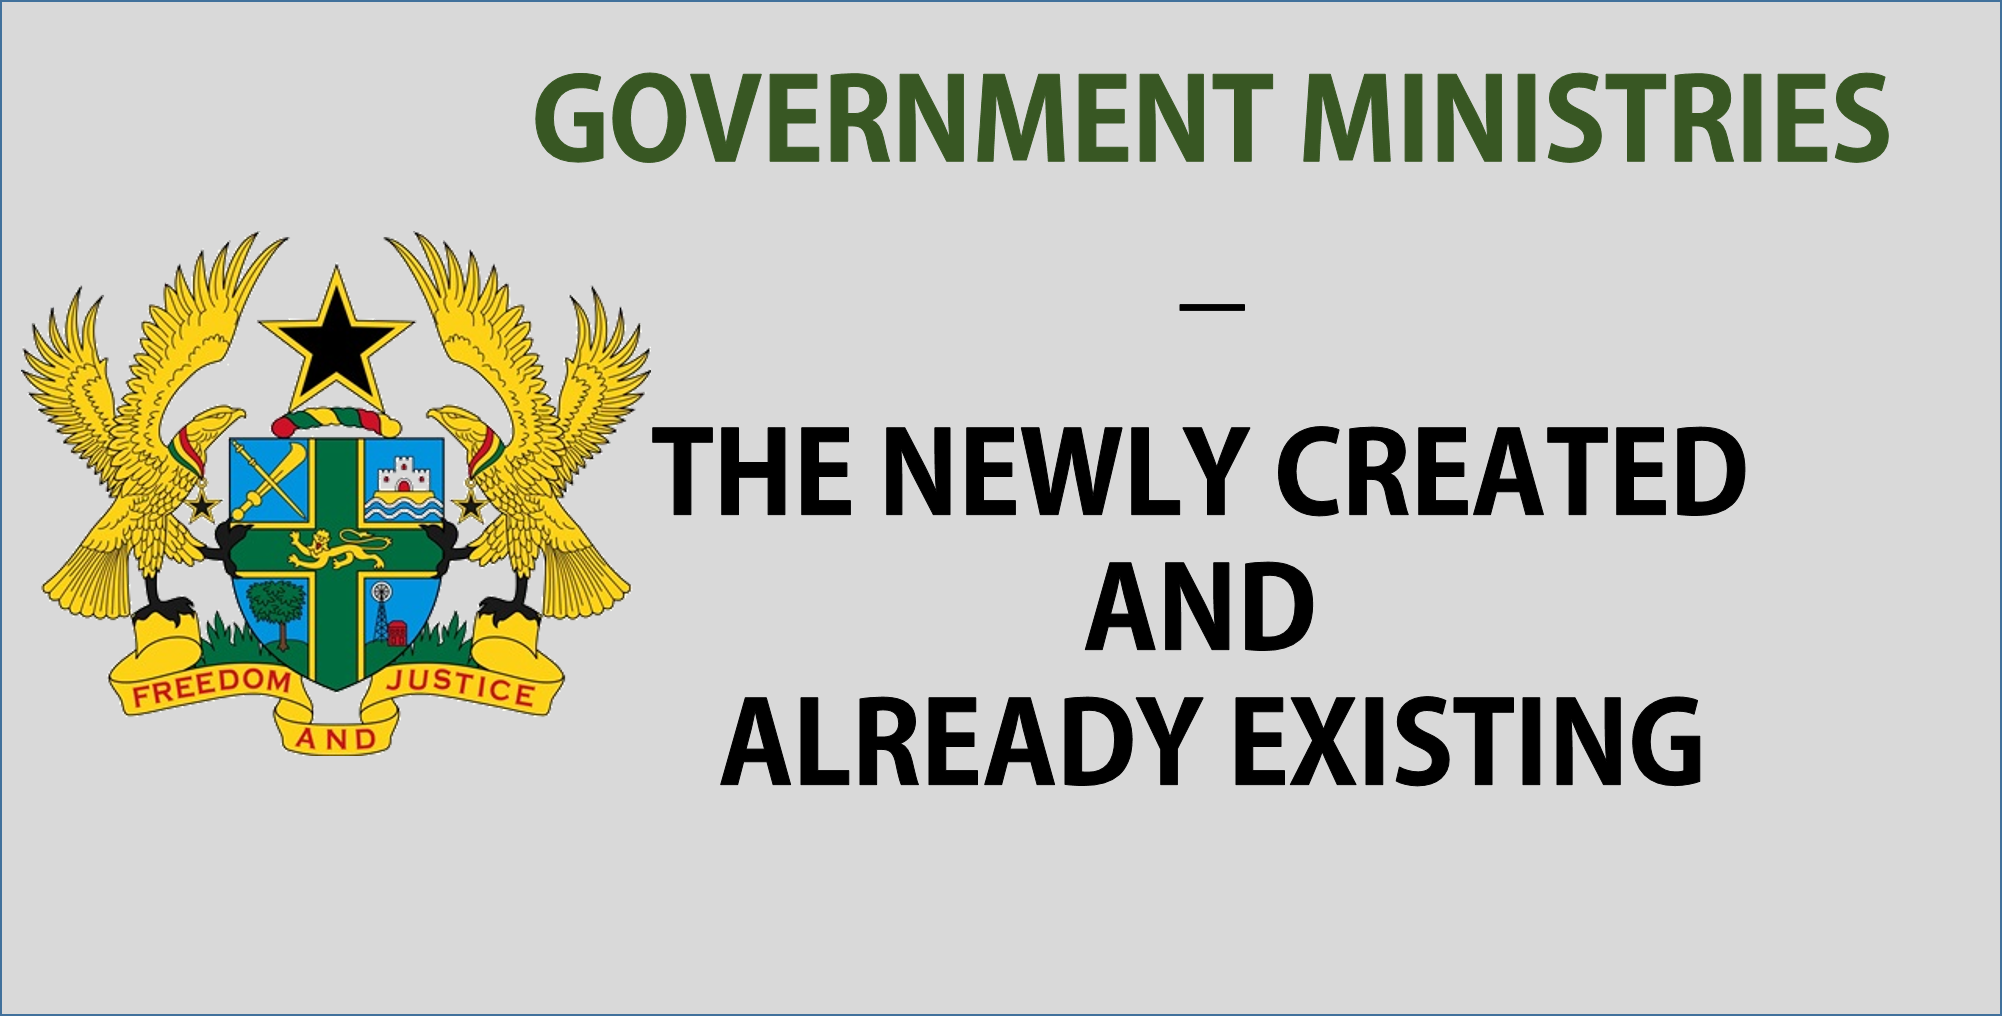 Ministries – The newly created and already existing [Infographic]